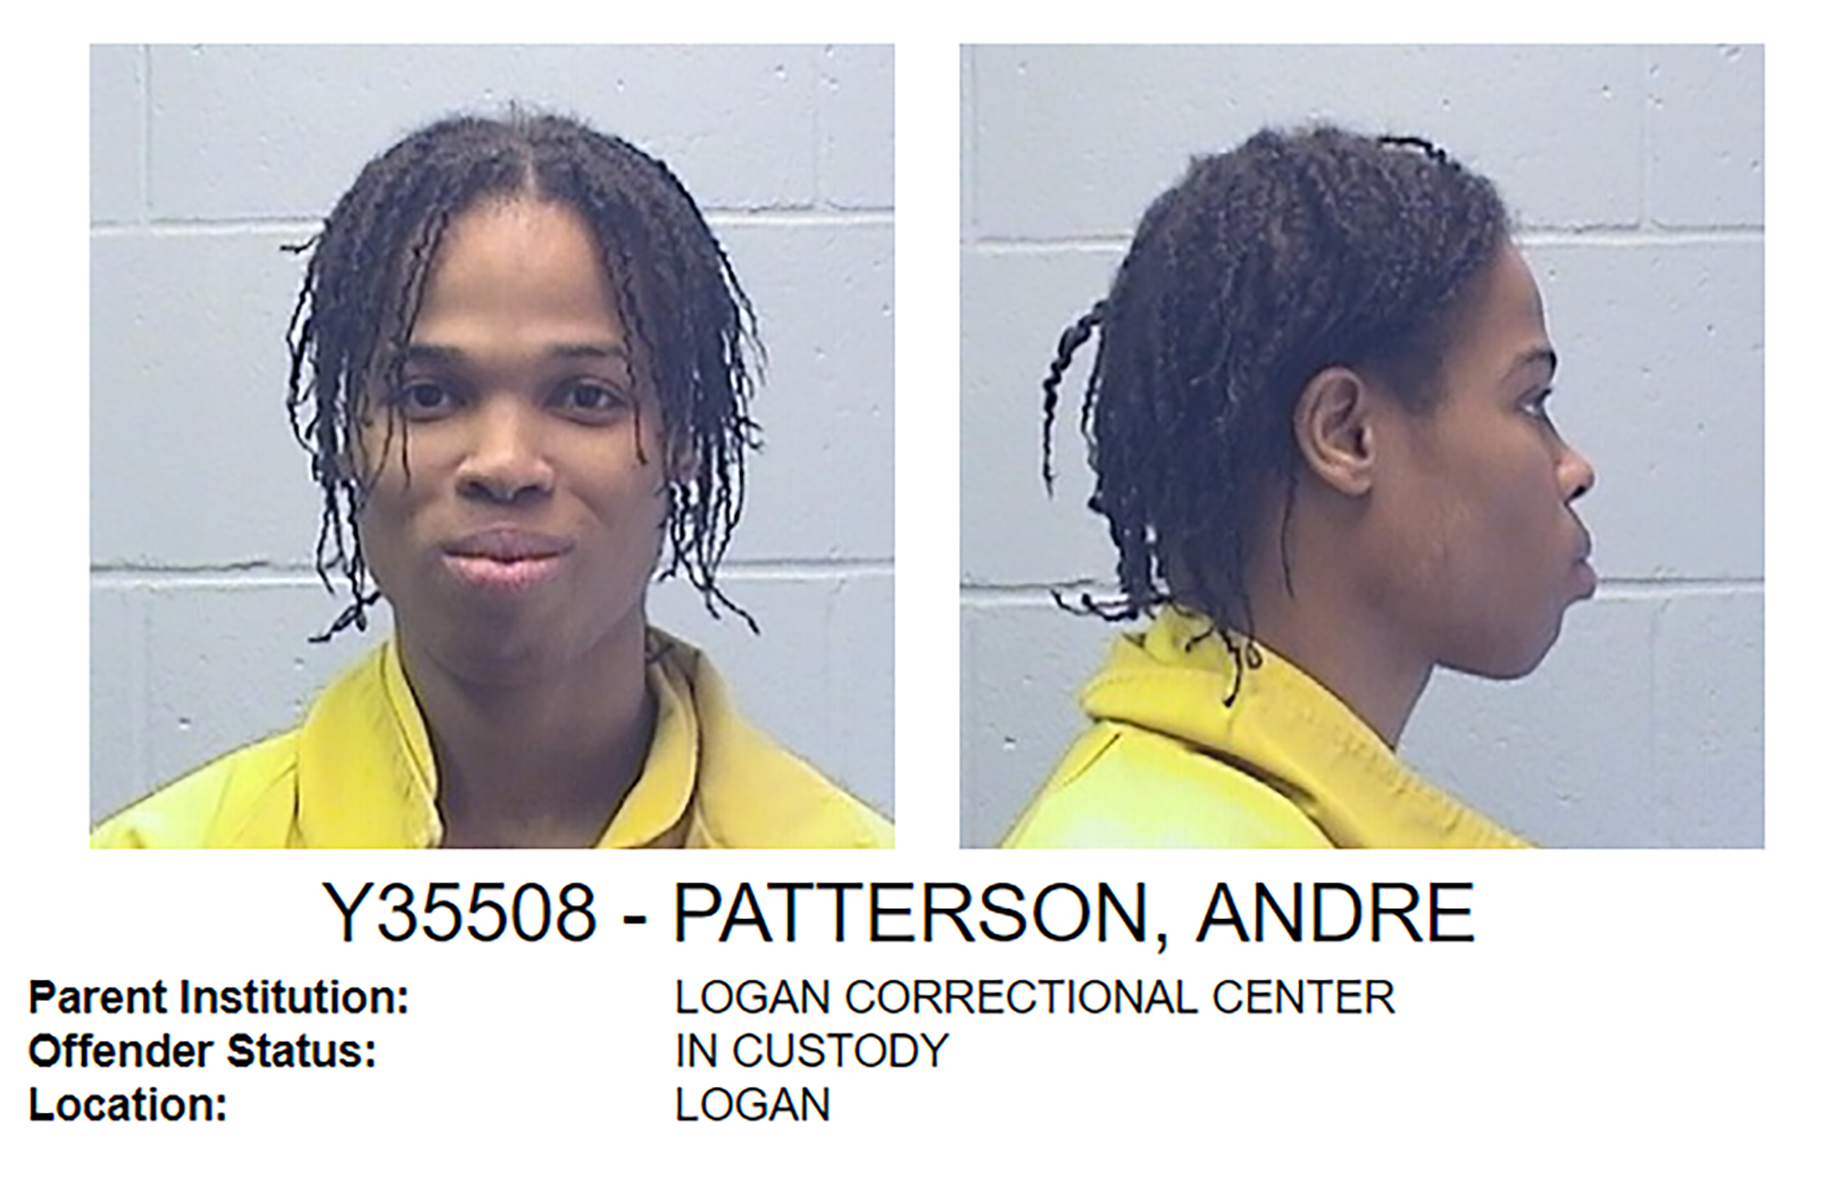 Janiah Monroe, who is incarcerated under the name Andre Patterson, was transferred recently to the Logan Correctional Center. (Illinois Department of Corrections)